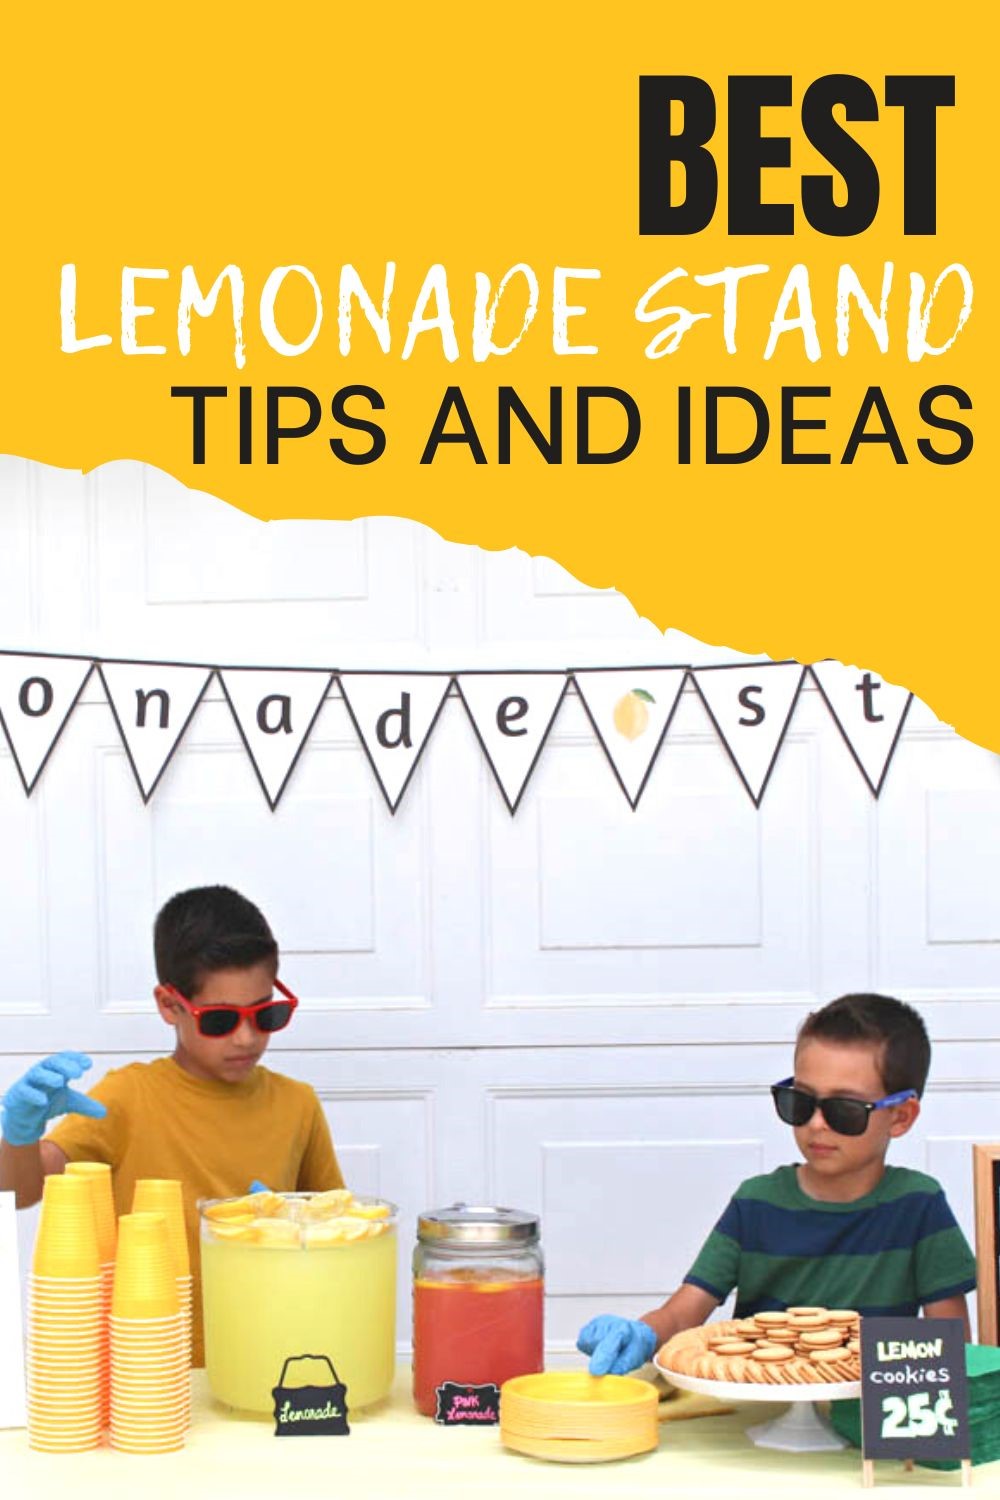 BEST LEMONADE STAND TIPS AND IDEAS